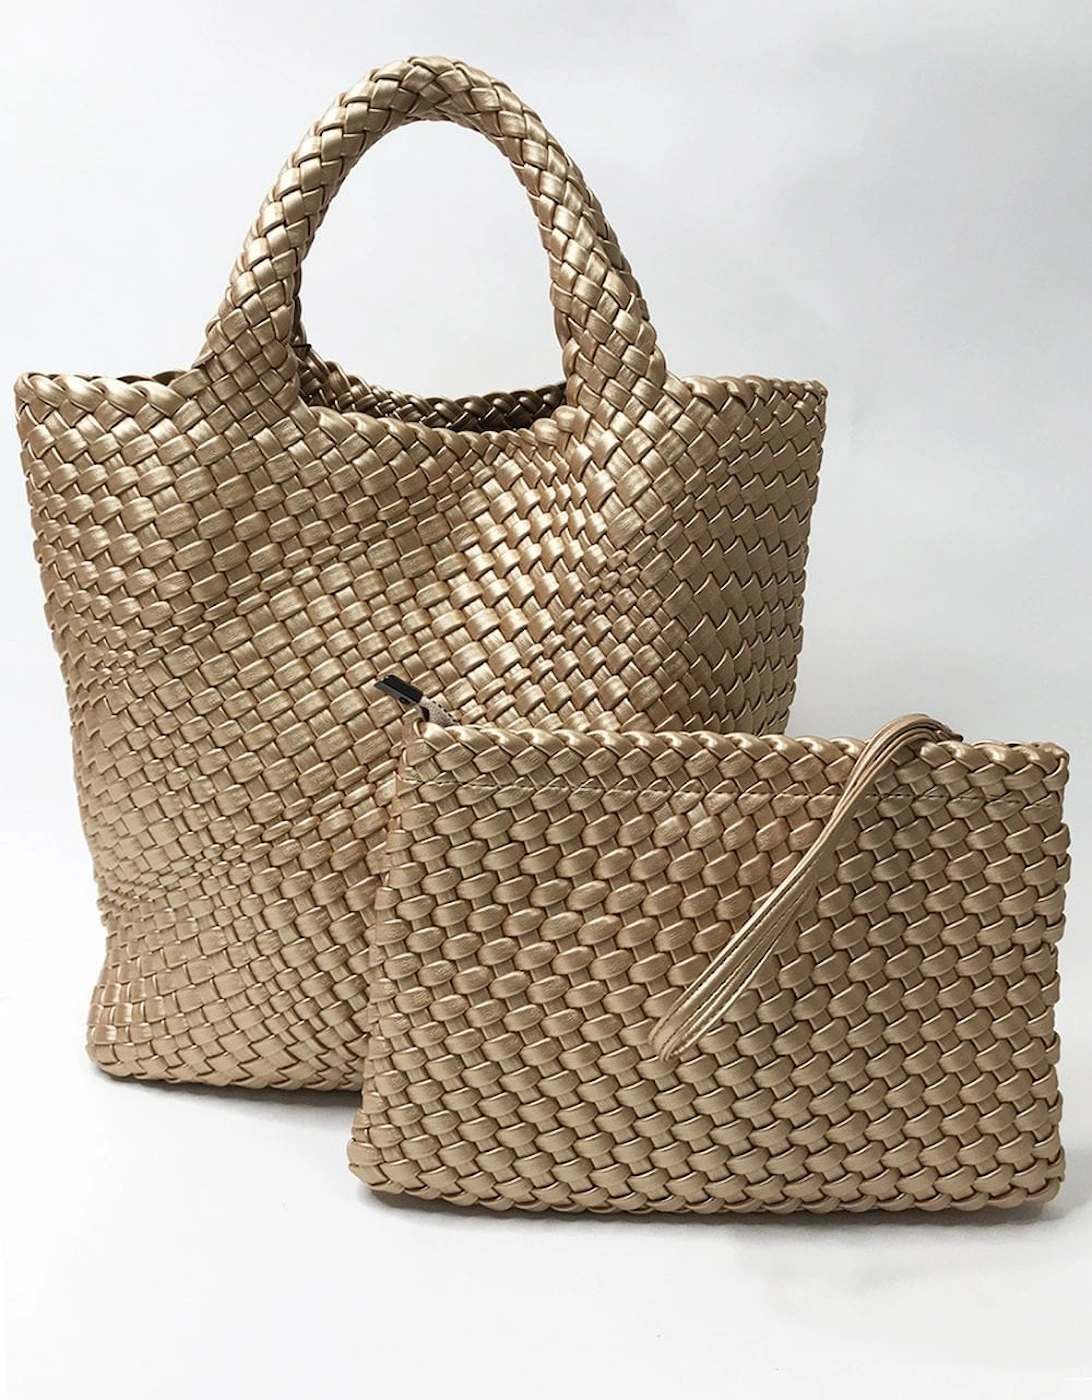 Gold Hand Knitted ECO Leather Tote Bag with Matching Purse